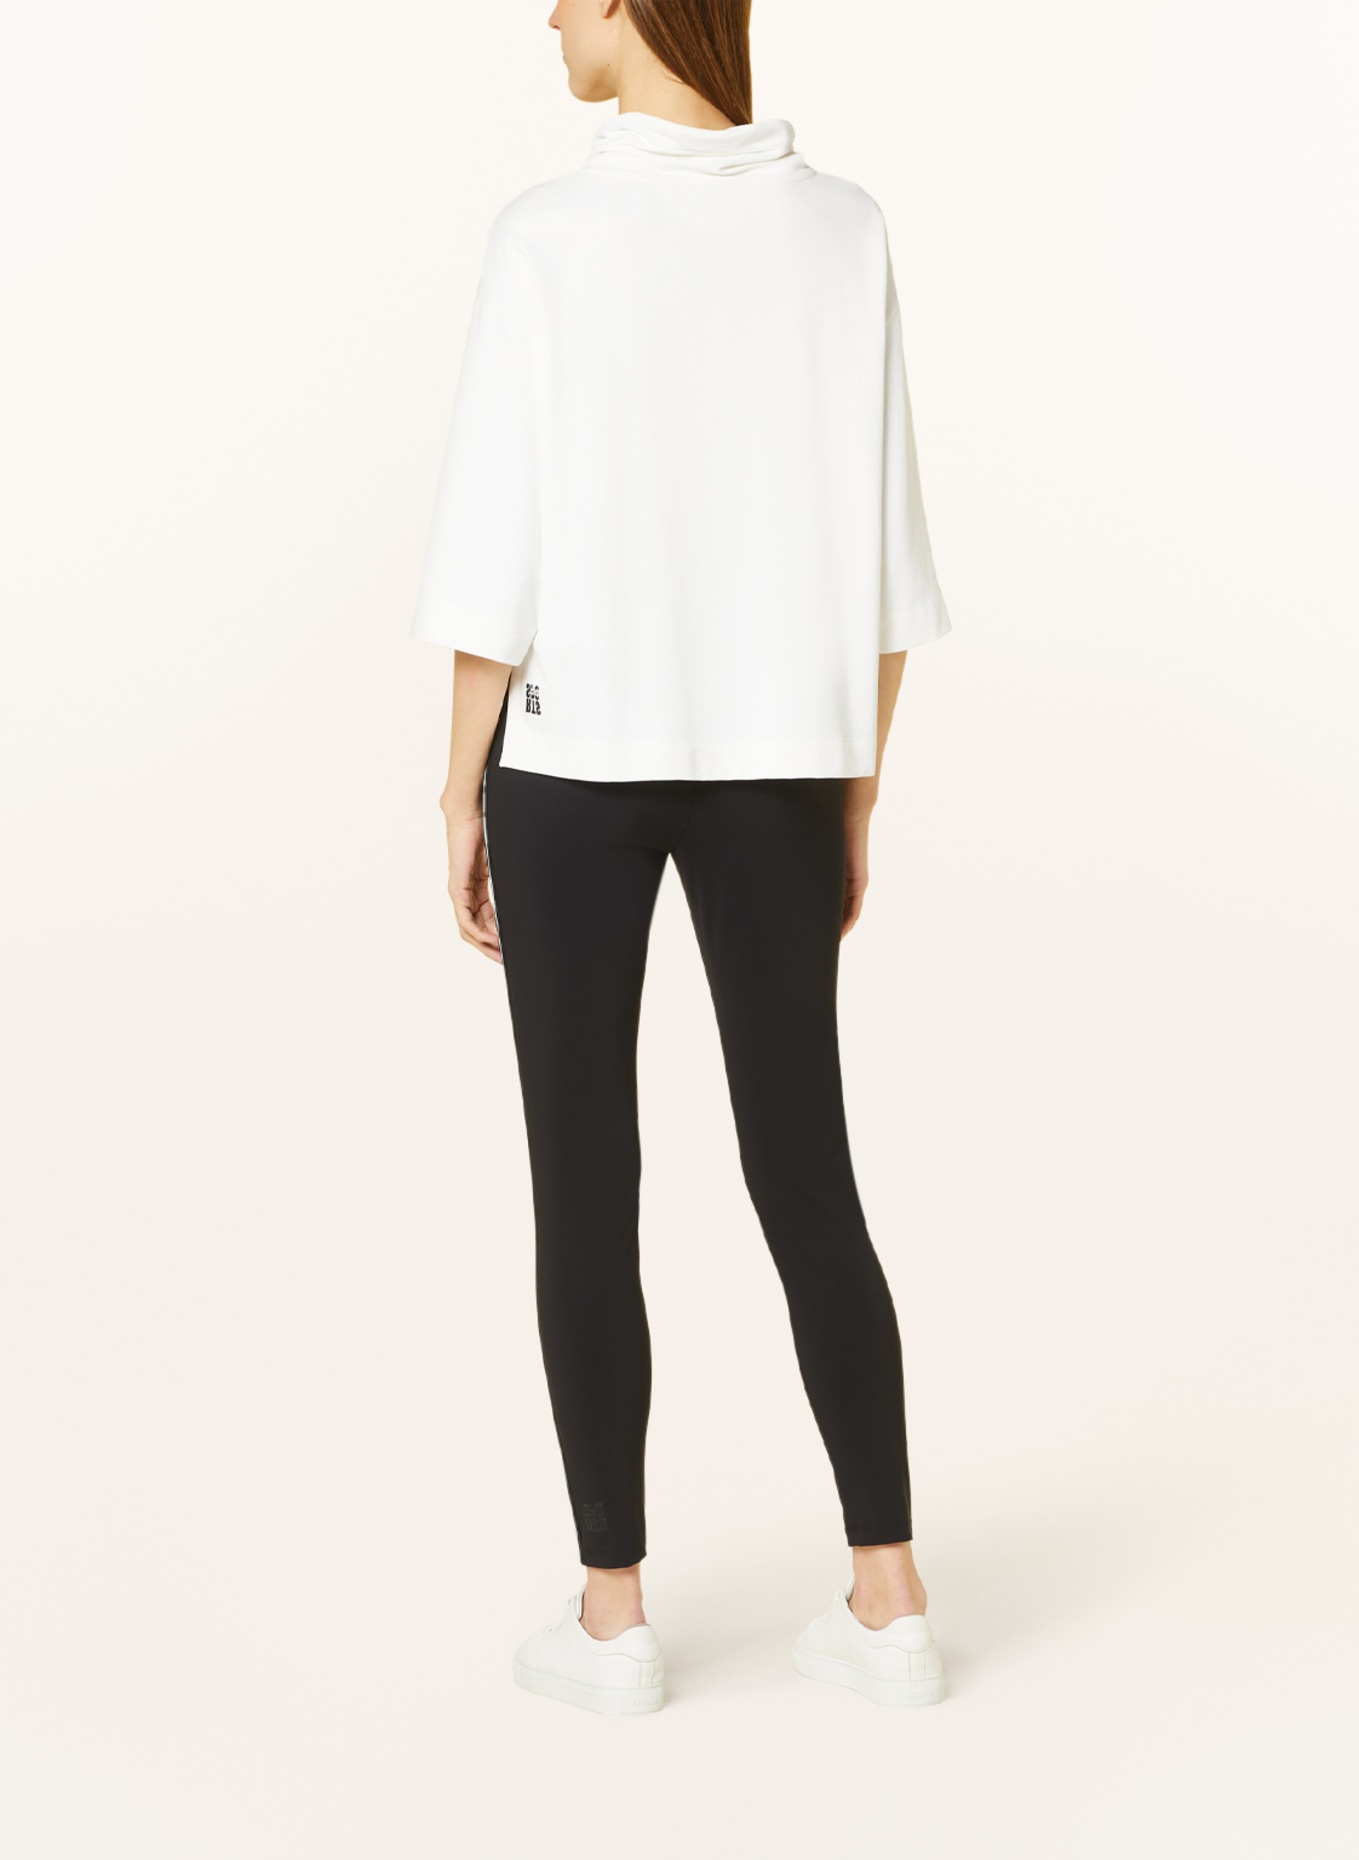 MARC CAIN Sweatshirt with 3/4 sleeves, Color: 190 white and black (Image 3)